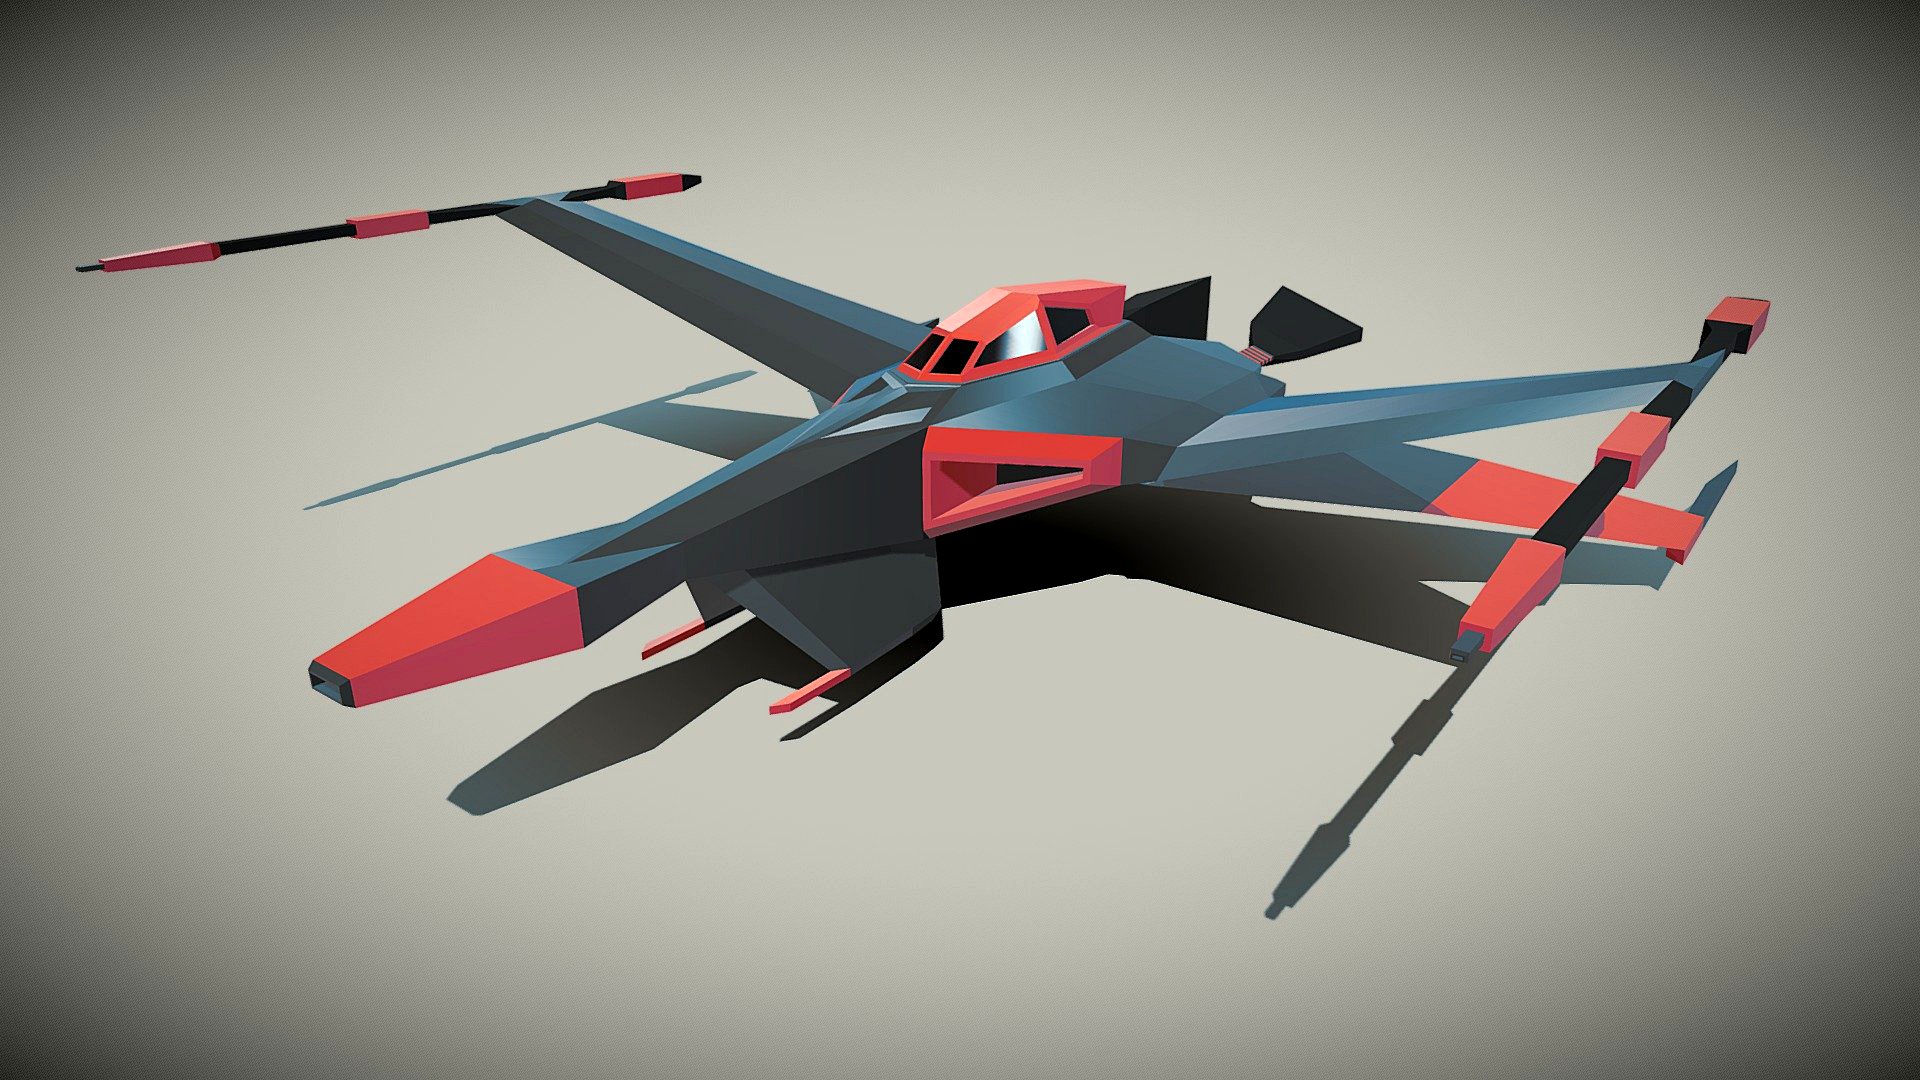 Lowpoly Battle Spaceship concept